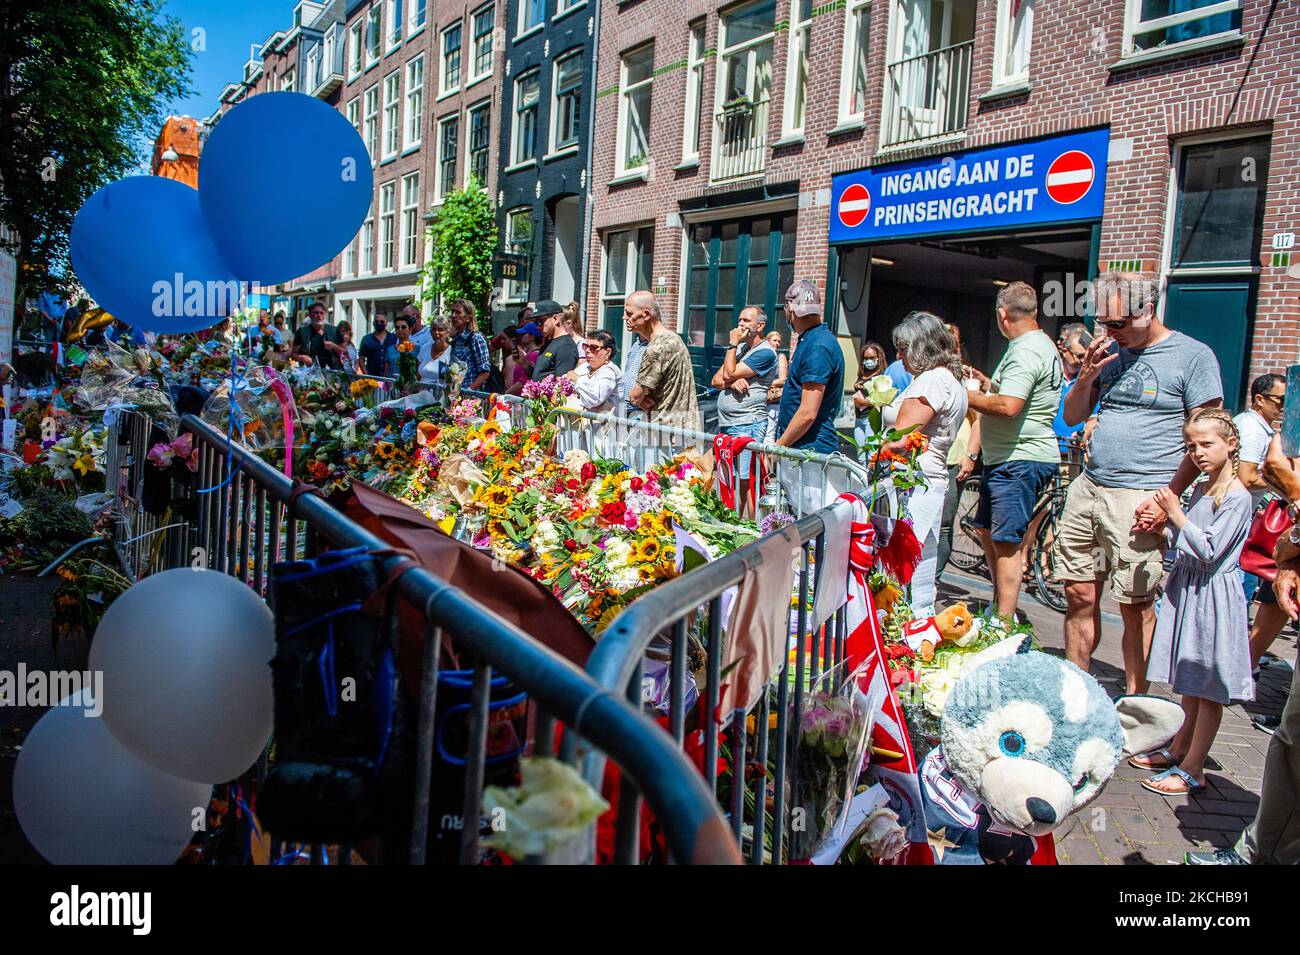 At the Lange Leidesdwarstraat in Amsterdam, where crime journalist Peter R. de Vries was shot 10 days ago after appearing on a television program, people keep coming to pay tribute and lay flowers. After days of fighting for his life, De Vries died this Thursday in the hospital. Two men have been arrested for the murder and have been remanded in custody, on July 17th, 2021. (Photo by Romy Arroyo Fernandez/NurPhoto) Stock Photo